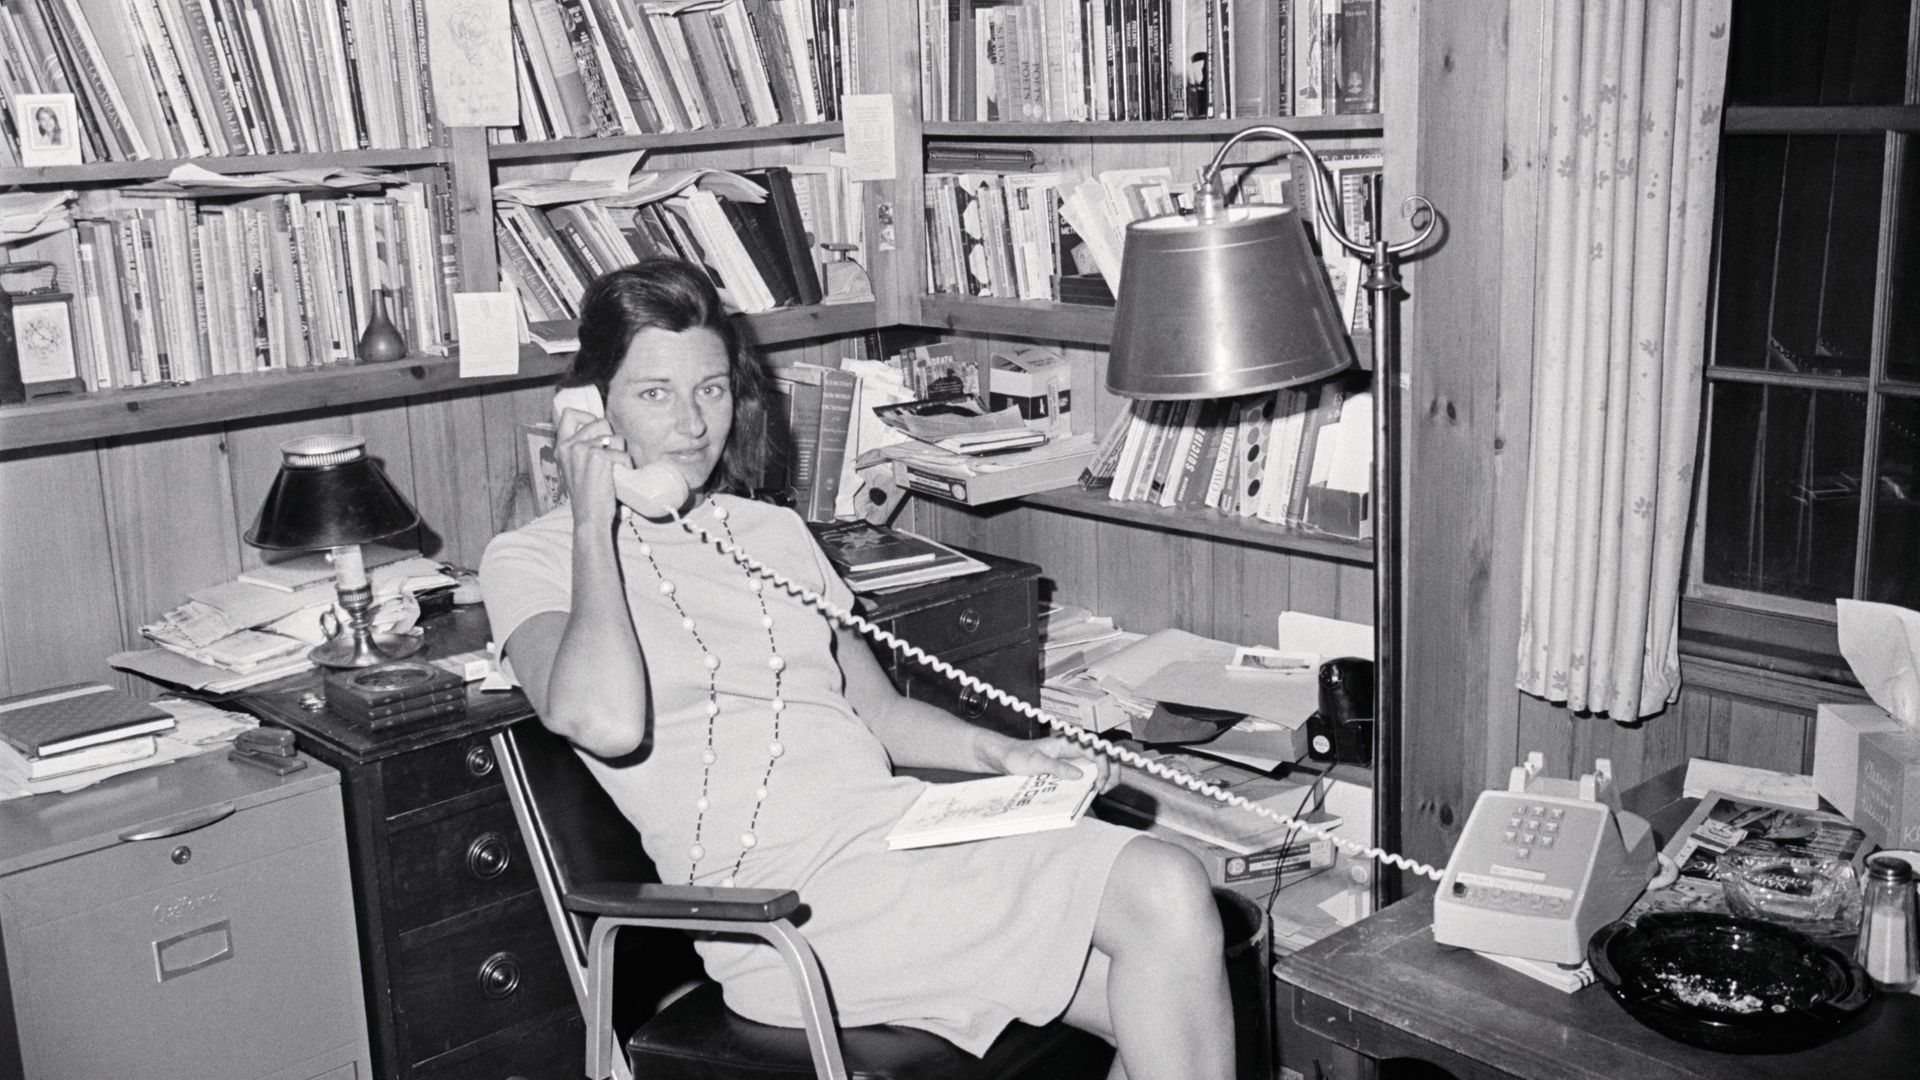 Anne Sexton talks on the phone in her office after winning the Pulitzer Prize for her book of poetry: Live or Die, 1967. - Credit: Bettmann Archive